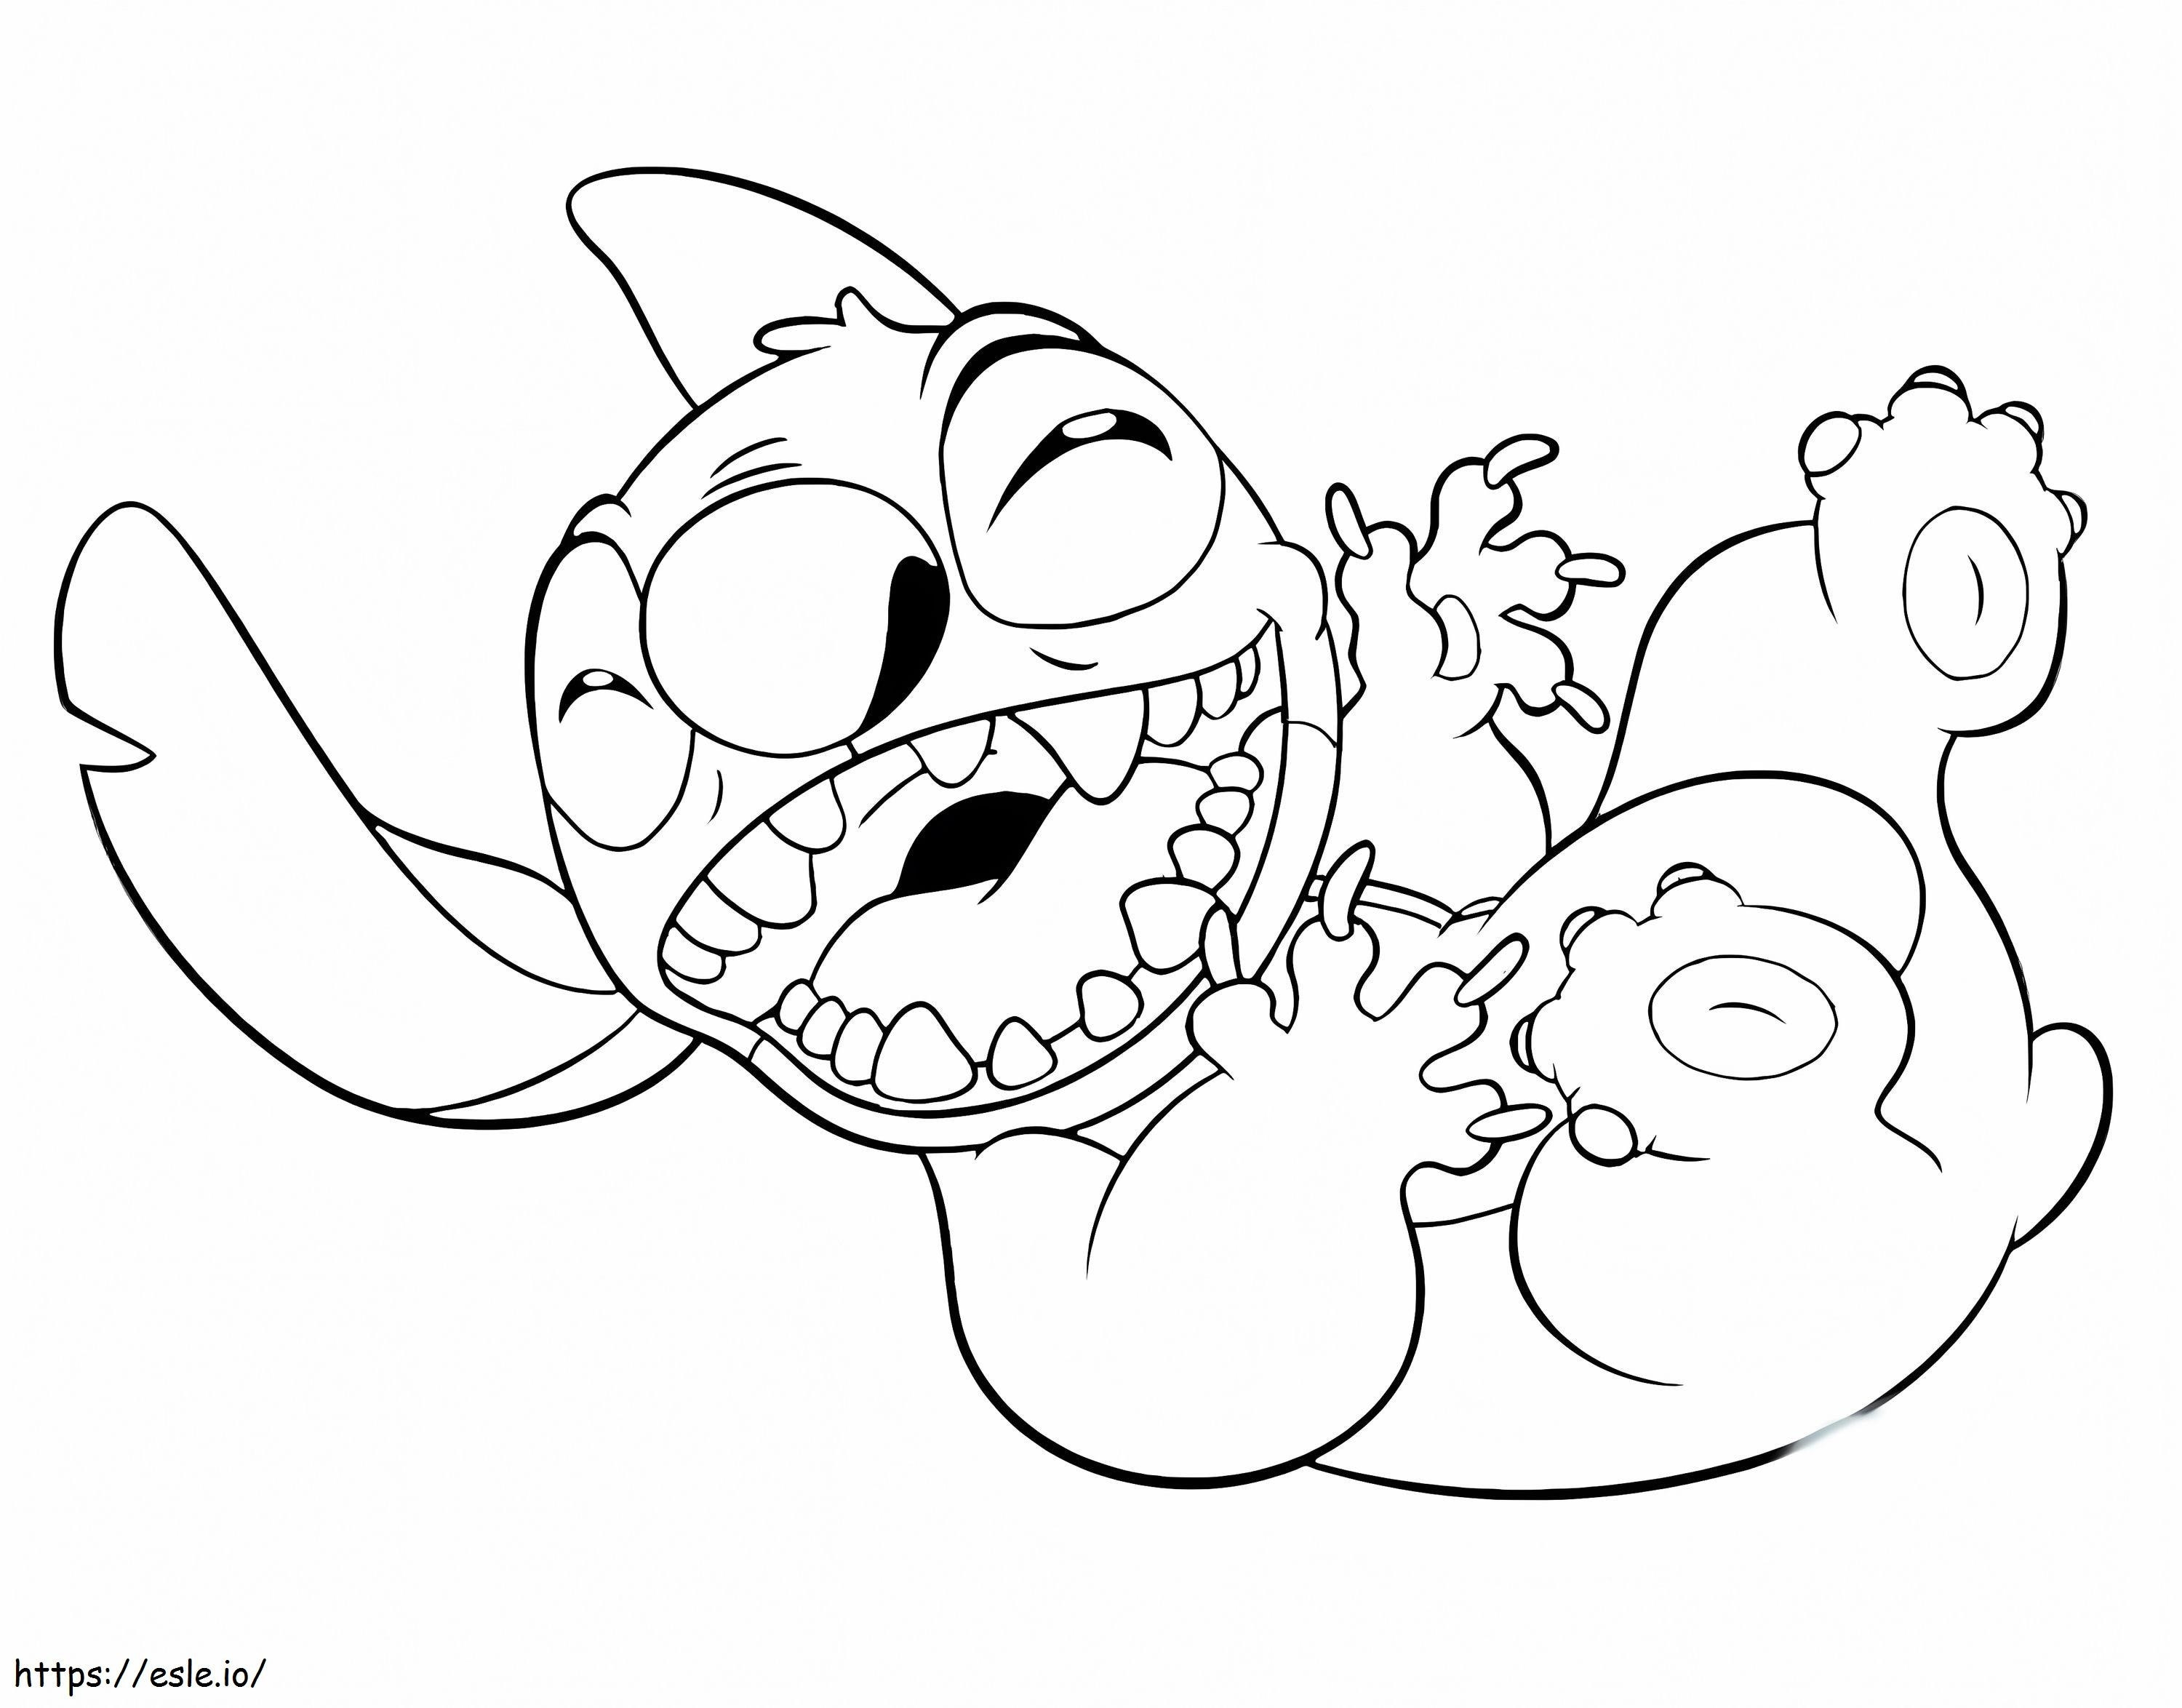 Funny Stitch coloring page